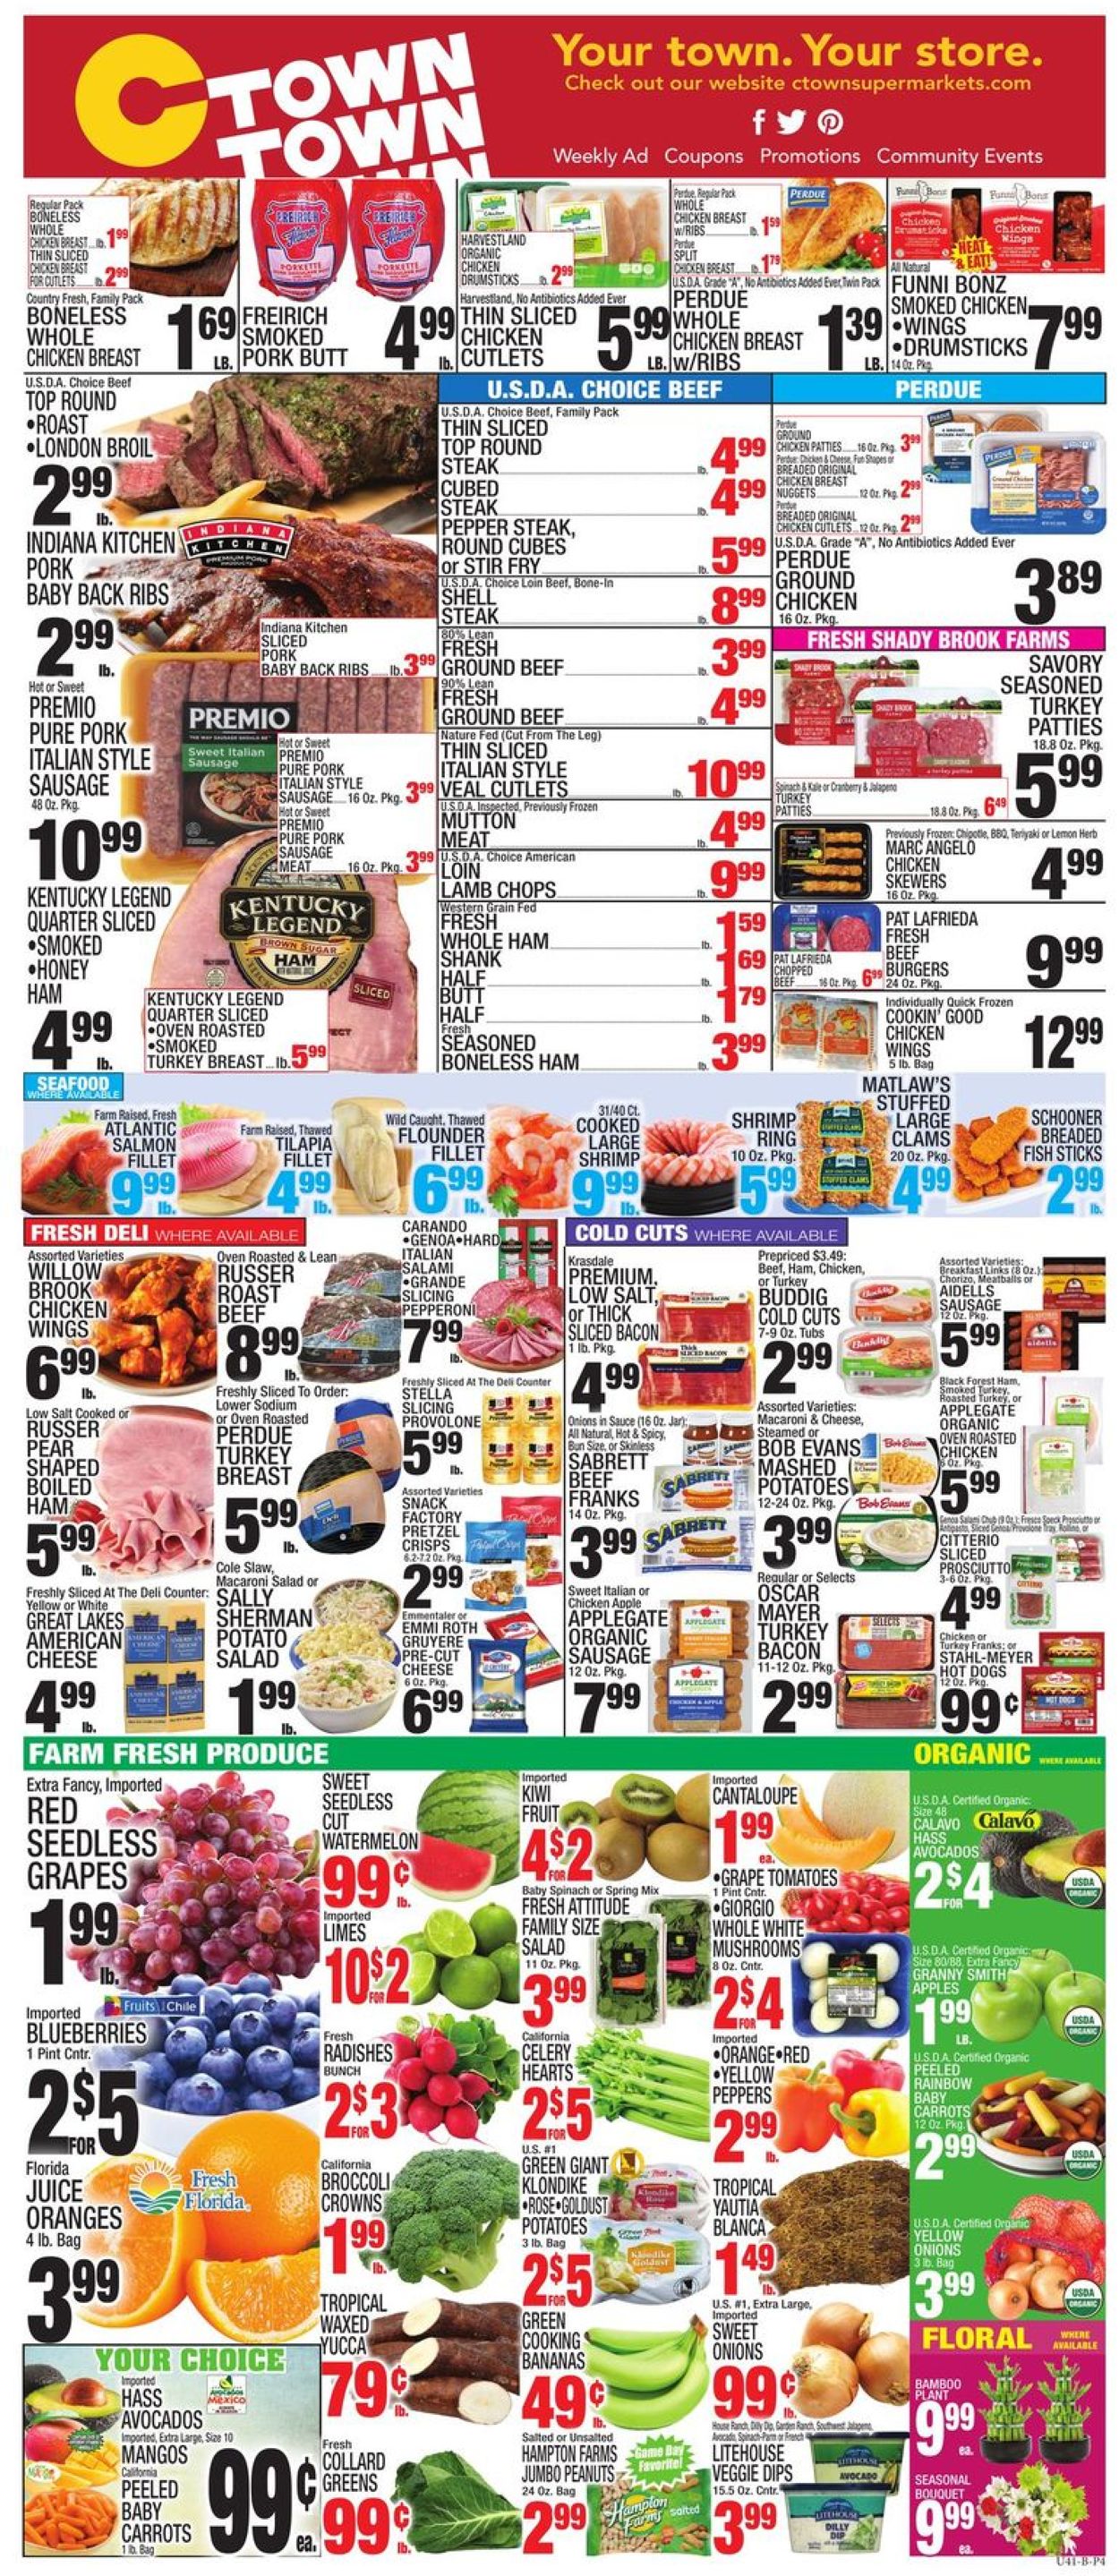 Catalogue C-Town - New Year's Ad 2019/2020 from 12/27/2019